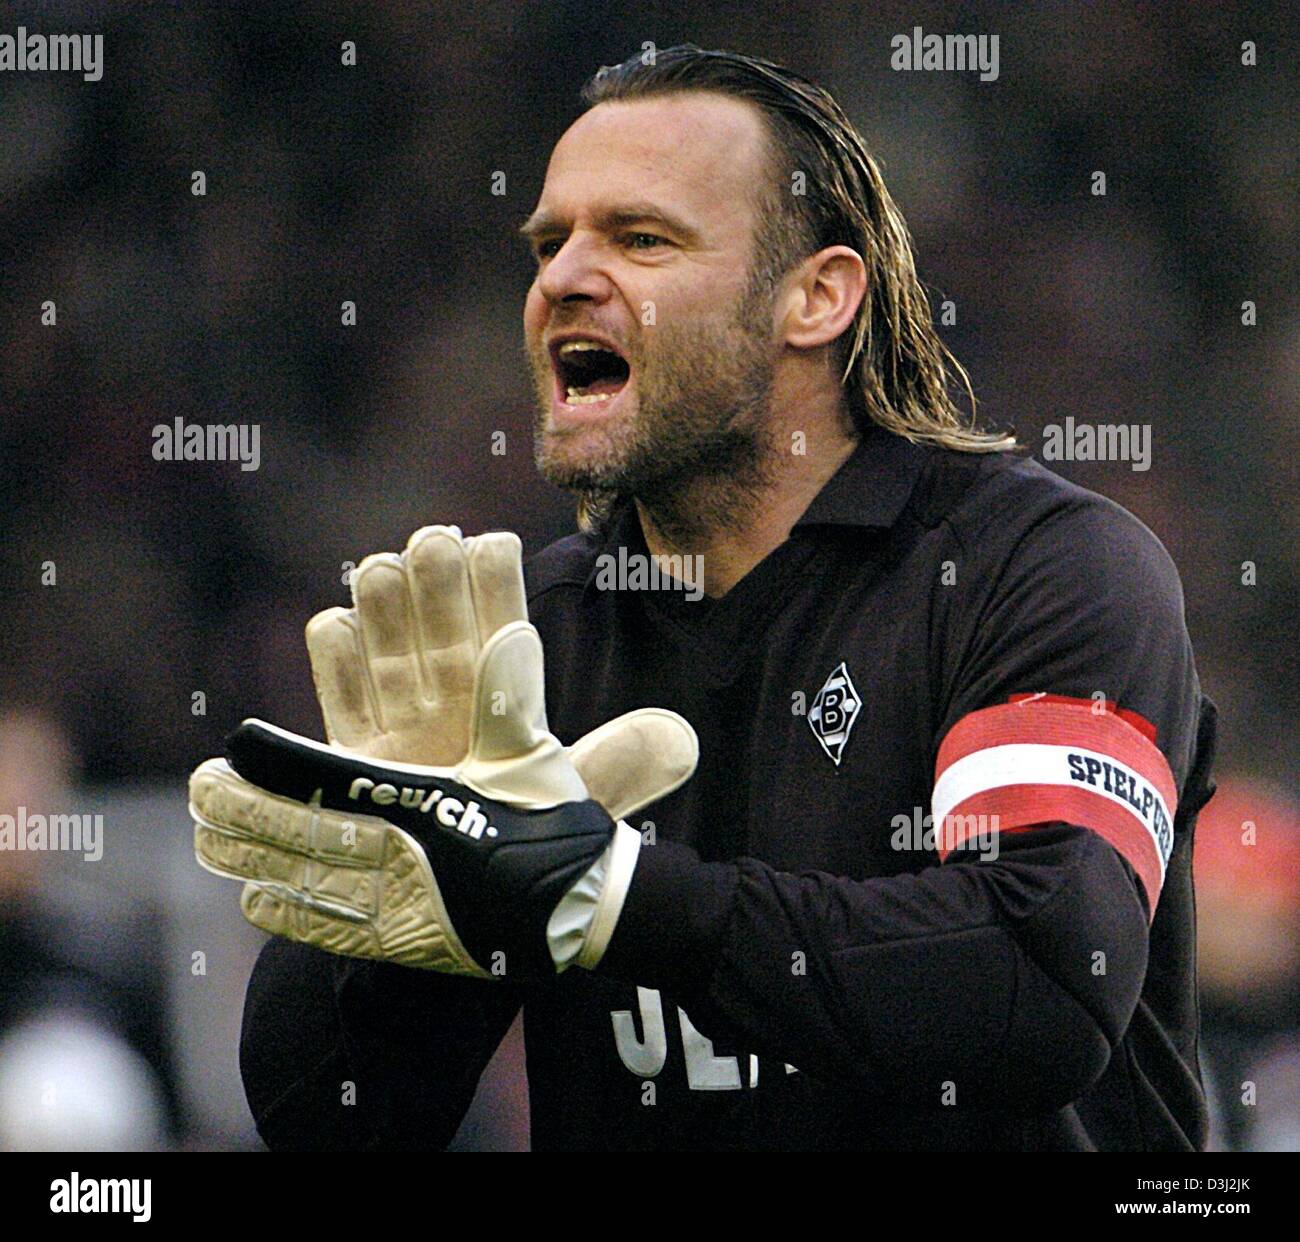 (dpa) Borussia Moenchengladbachs Swiss goalie Joerg Stiel shouts encouragement to his fellow players during the match VfB Stuttgart vs. Borussia Moenchengladbach on 14 February 2004 at the Daimler-Stadion in Stuttgart, Germany. The game ended in a 1:1 draw. Stock Photo